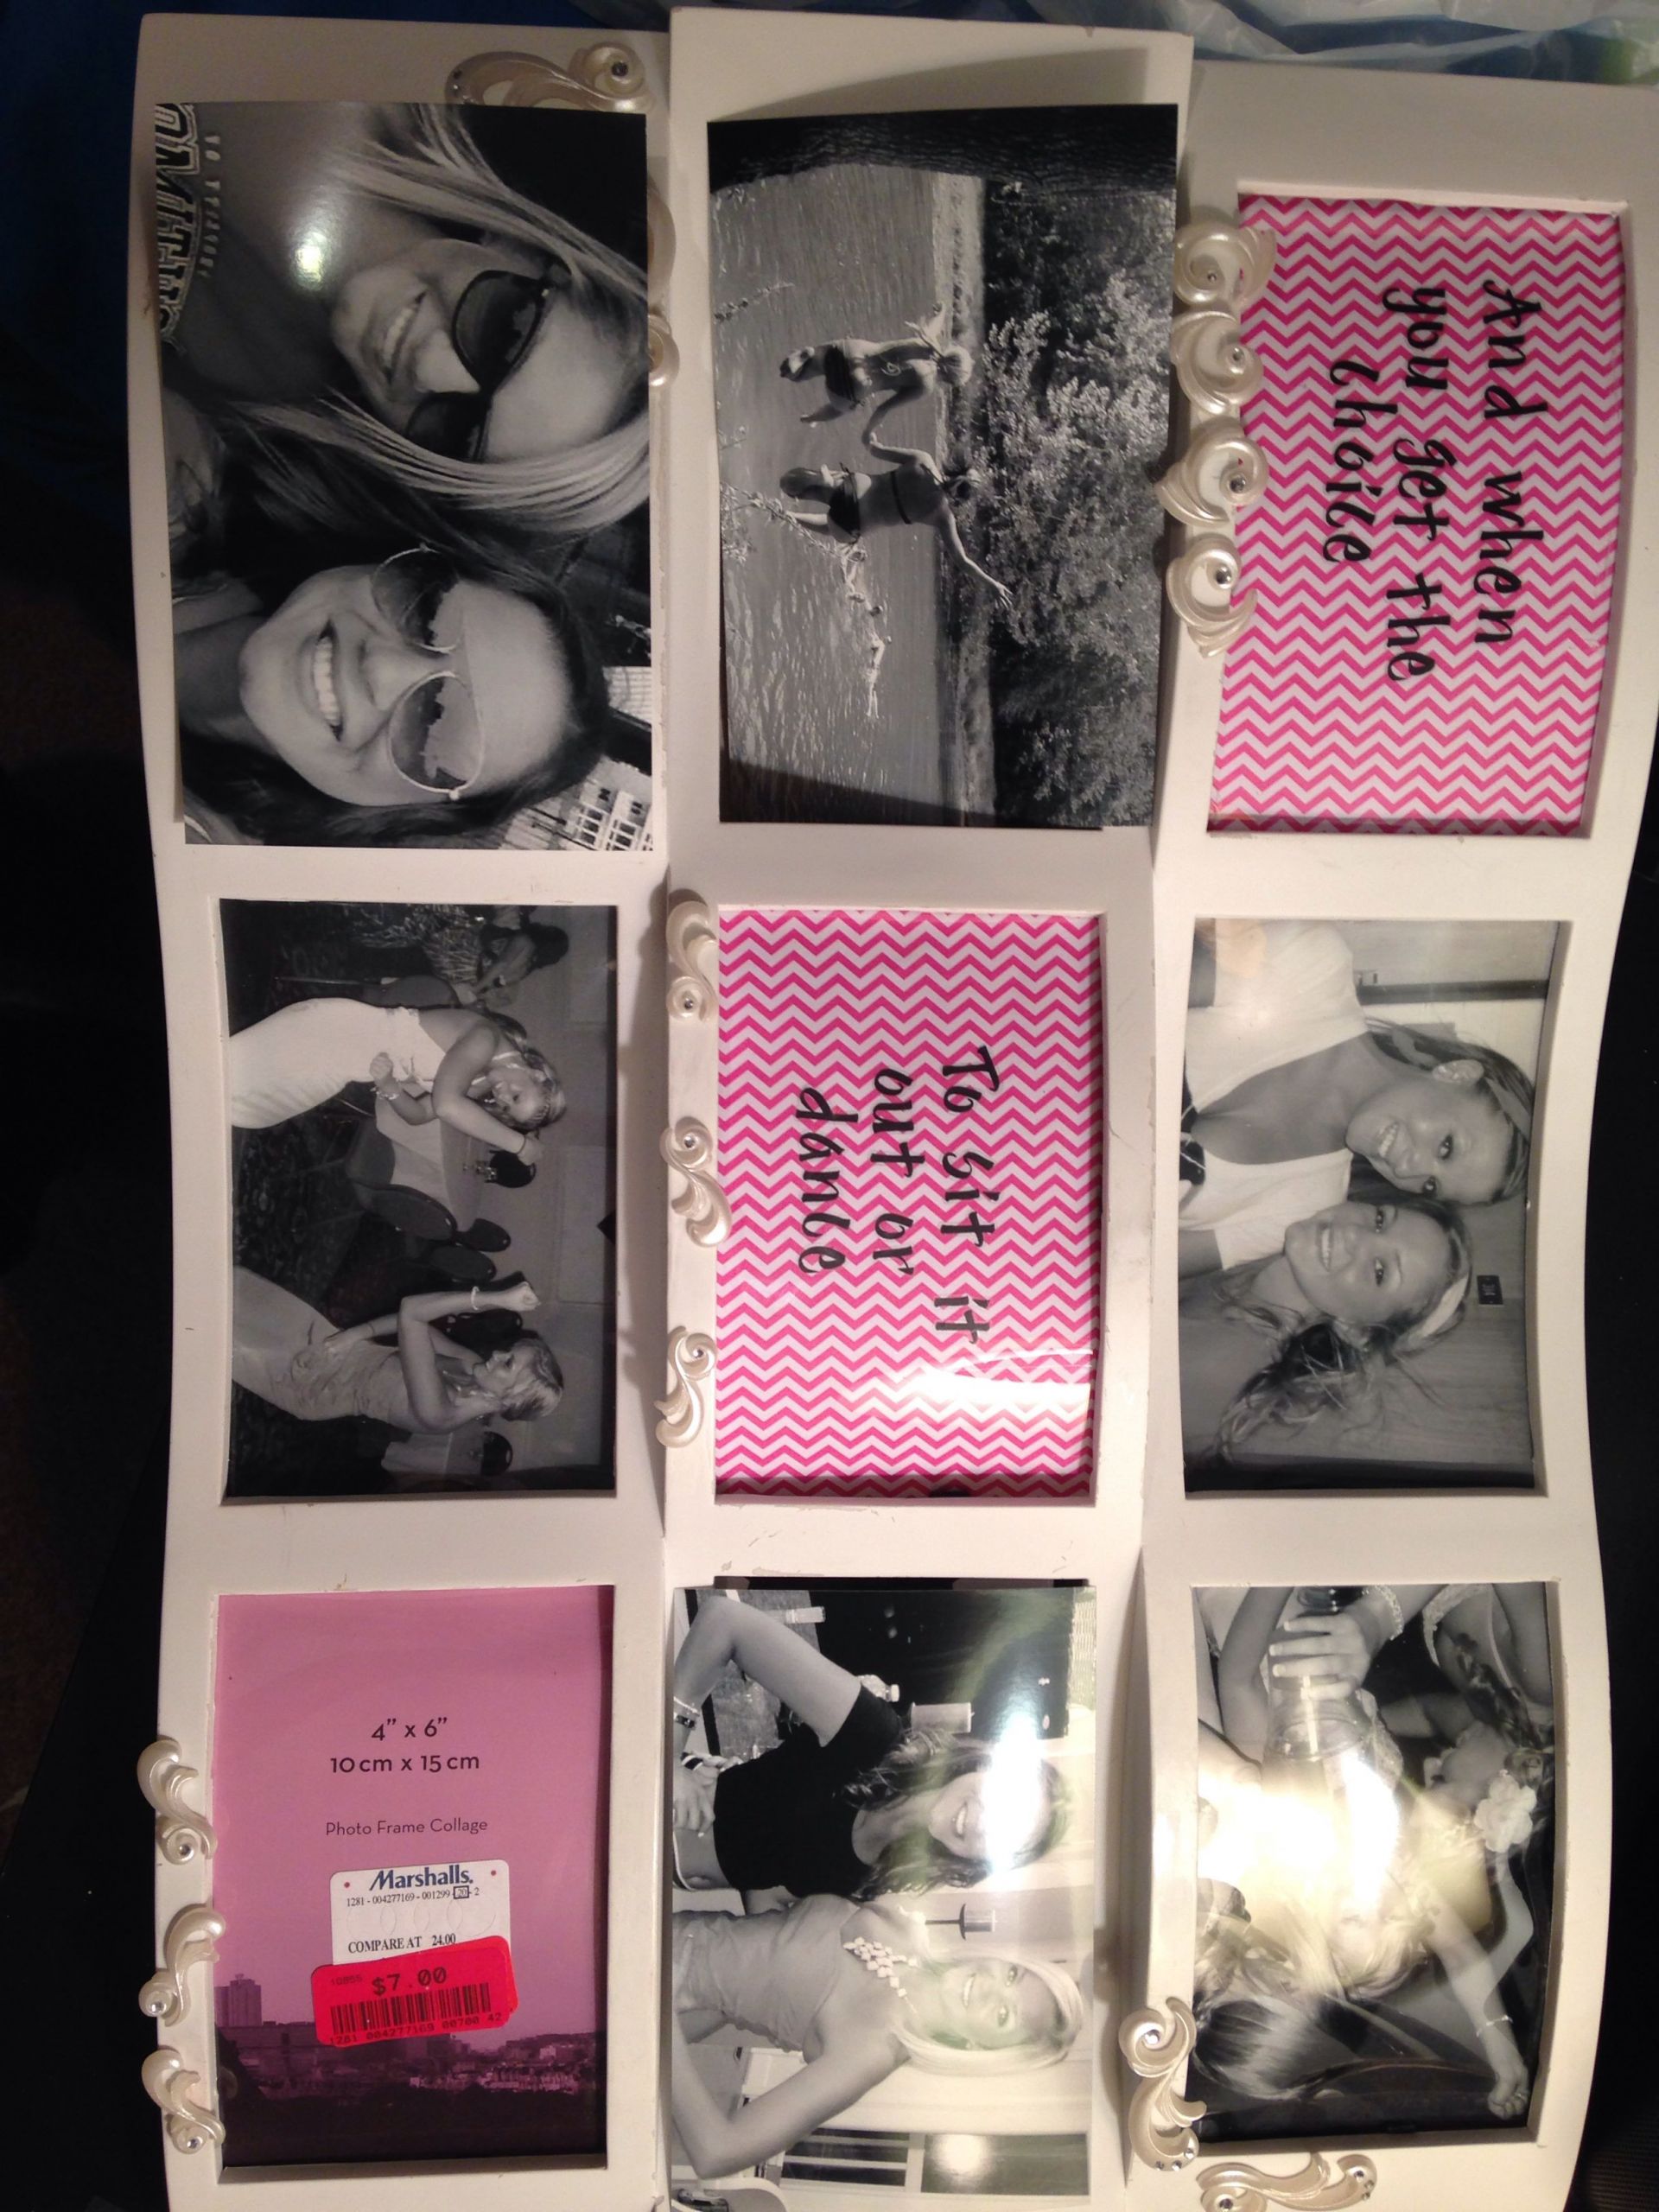 Graduation Gift Ideas For Your Best Friend
 DIY picture frame collage graduation t to my best